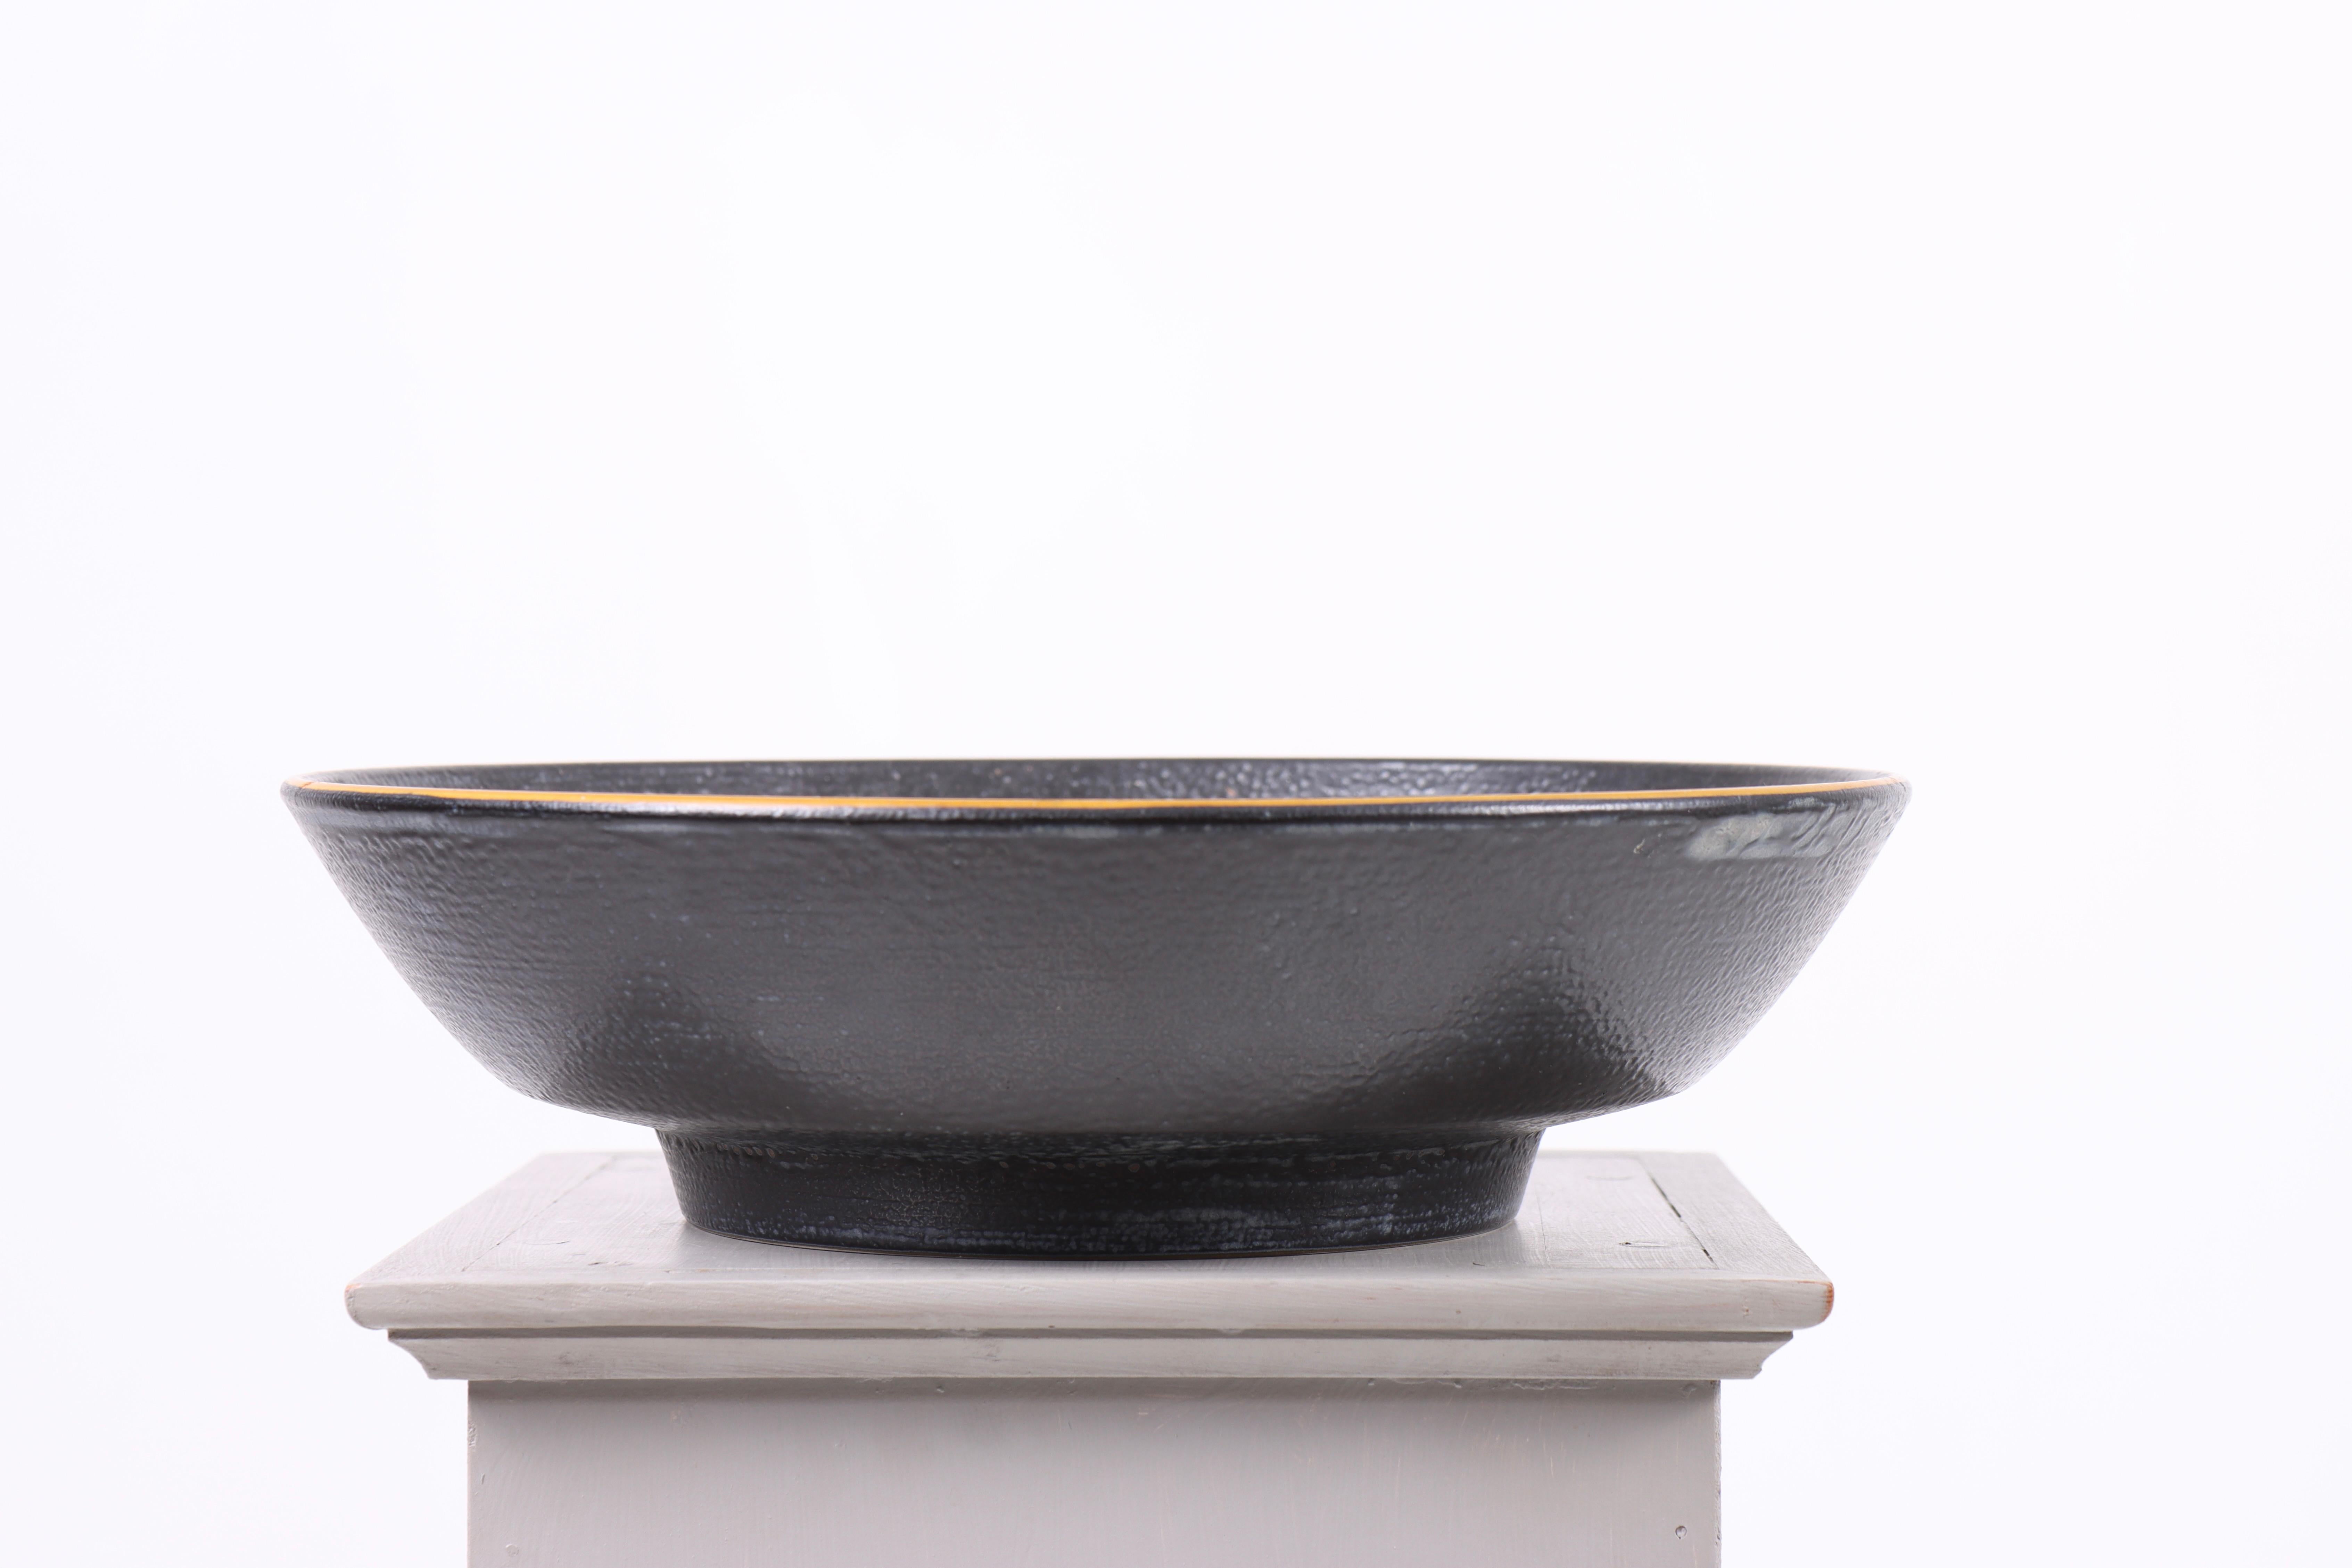 Decorative Large Bowl designed by Nils Thorsson and made by Aluminia. Made in Denmark. Great original condition.